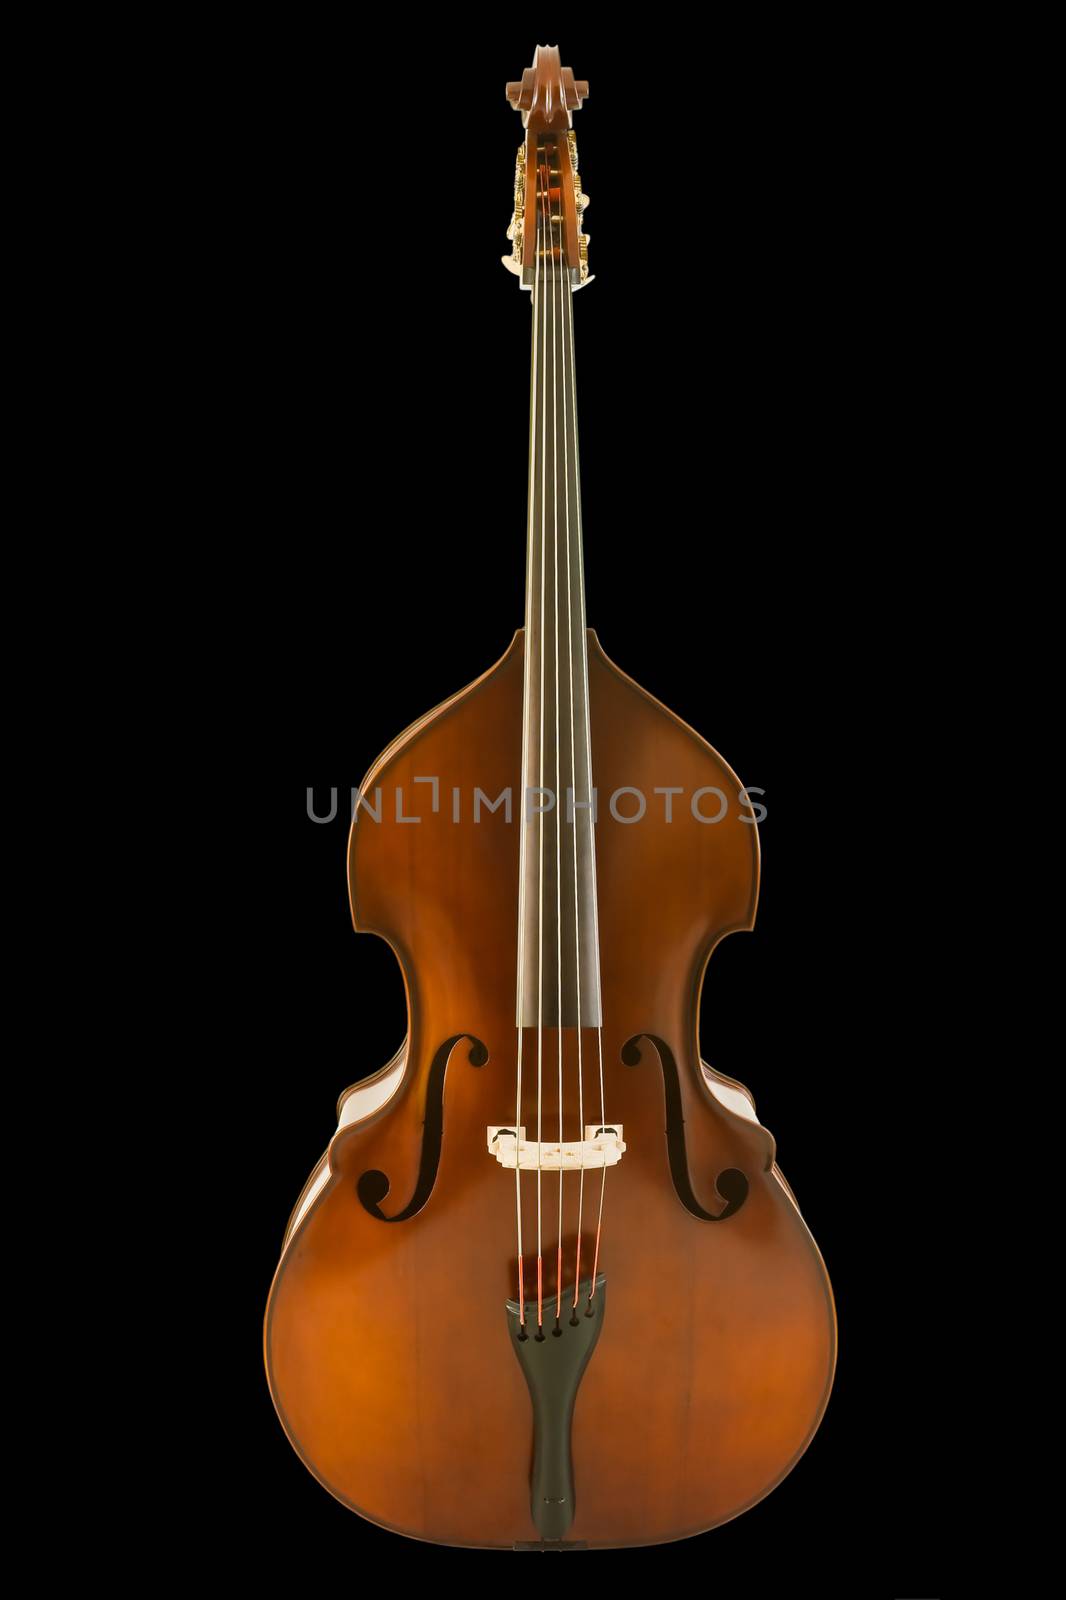 Vintage viola isolated on black background, clipping path.